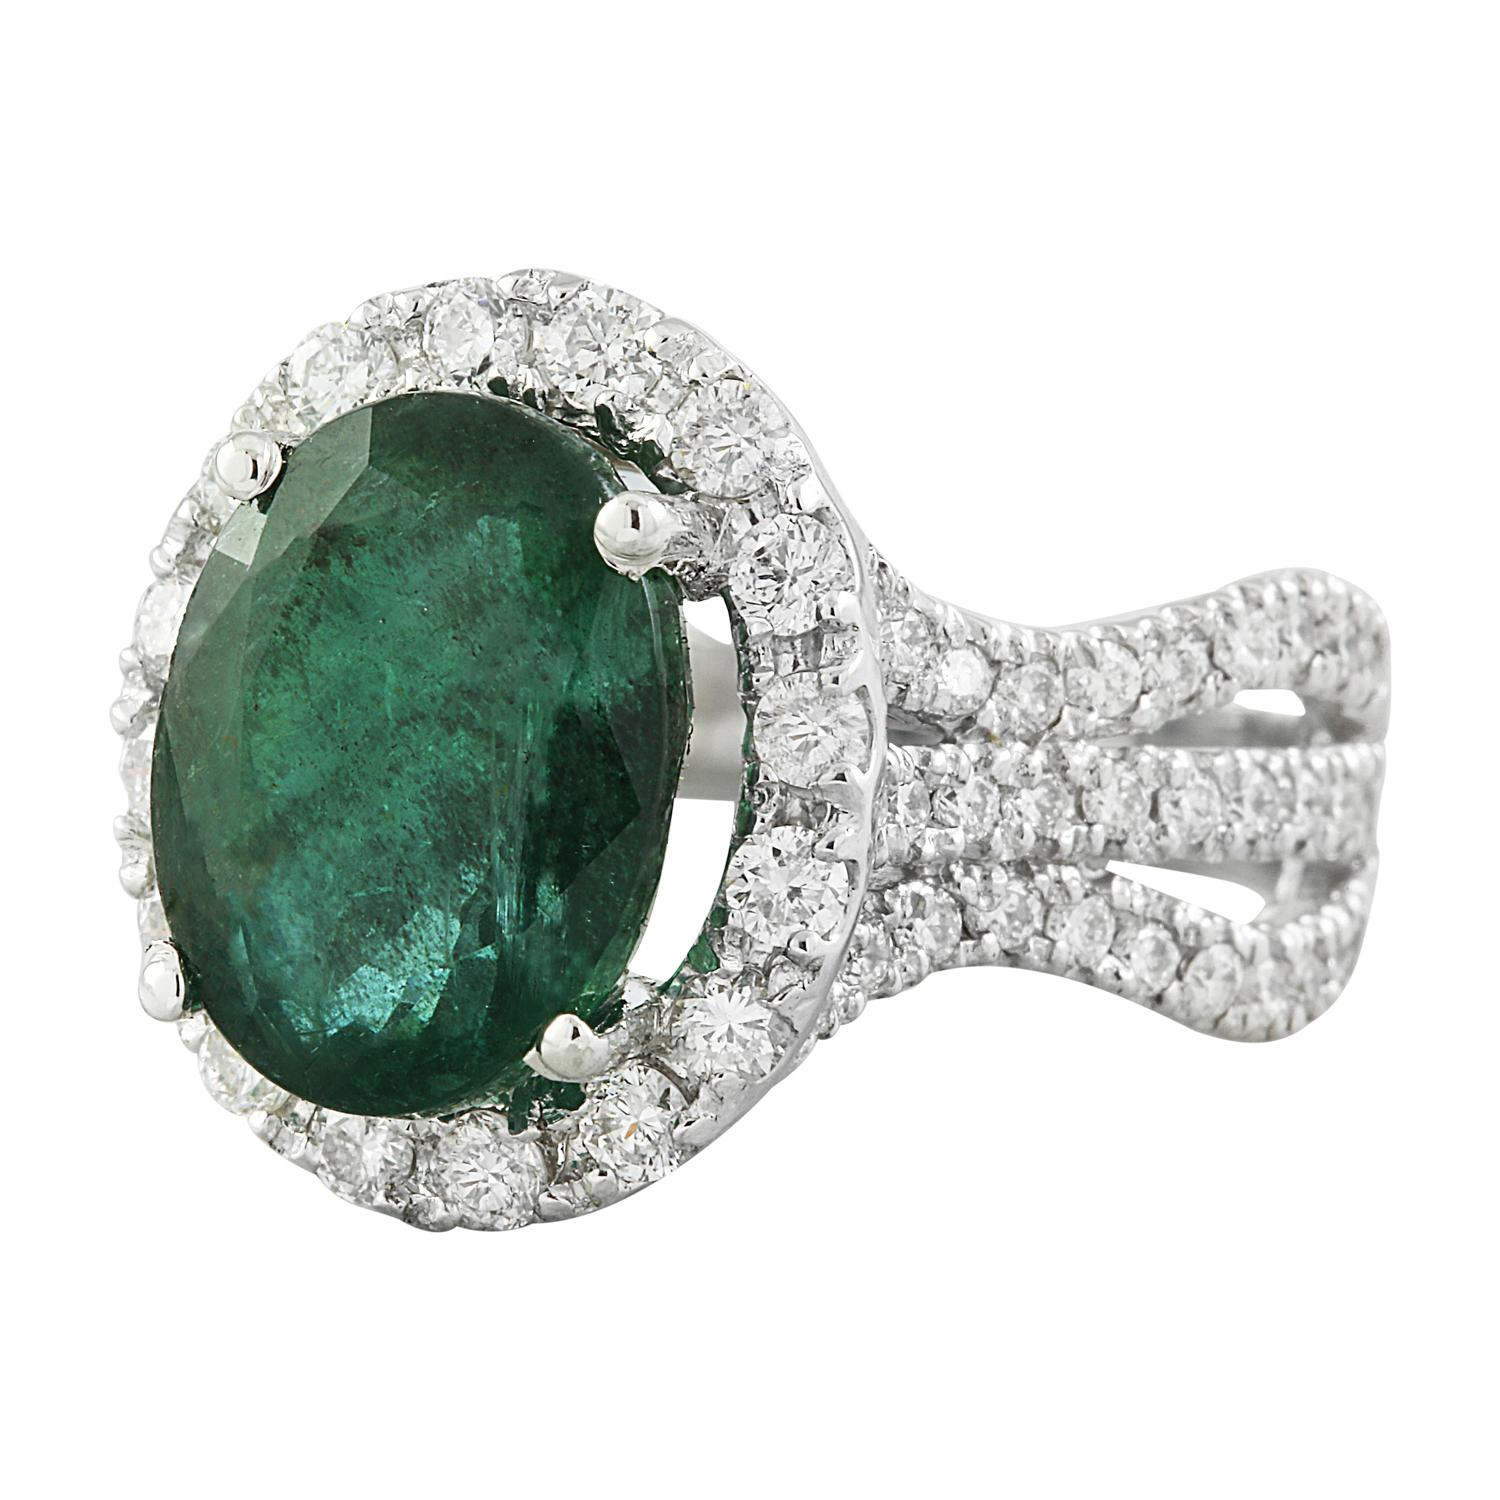 Introducing a masterpiece of unparalleled beauty and sophistication - the 6.86 Carat Natural Emerald 14 Karat Solid White Gold Diamond Ring. This ring is a true testament to luxury and elegance.

Crafted to perfection in 14K solid white gold, this